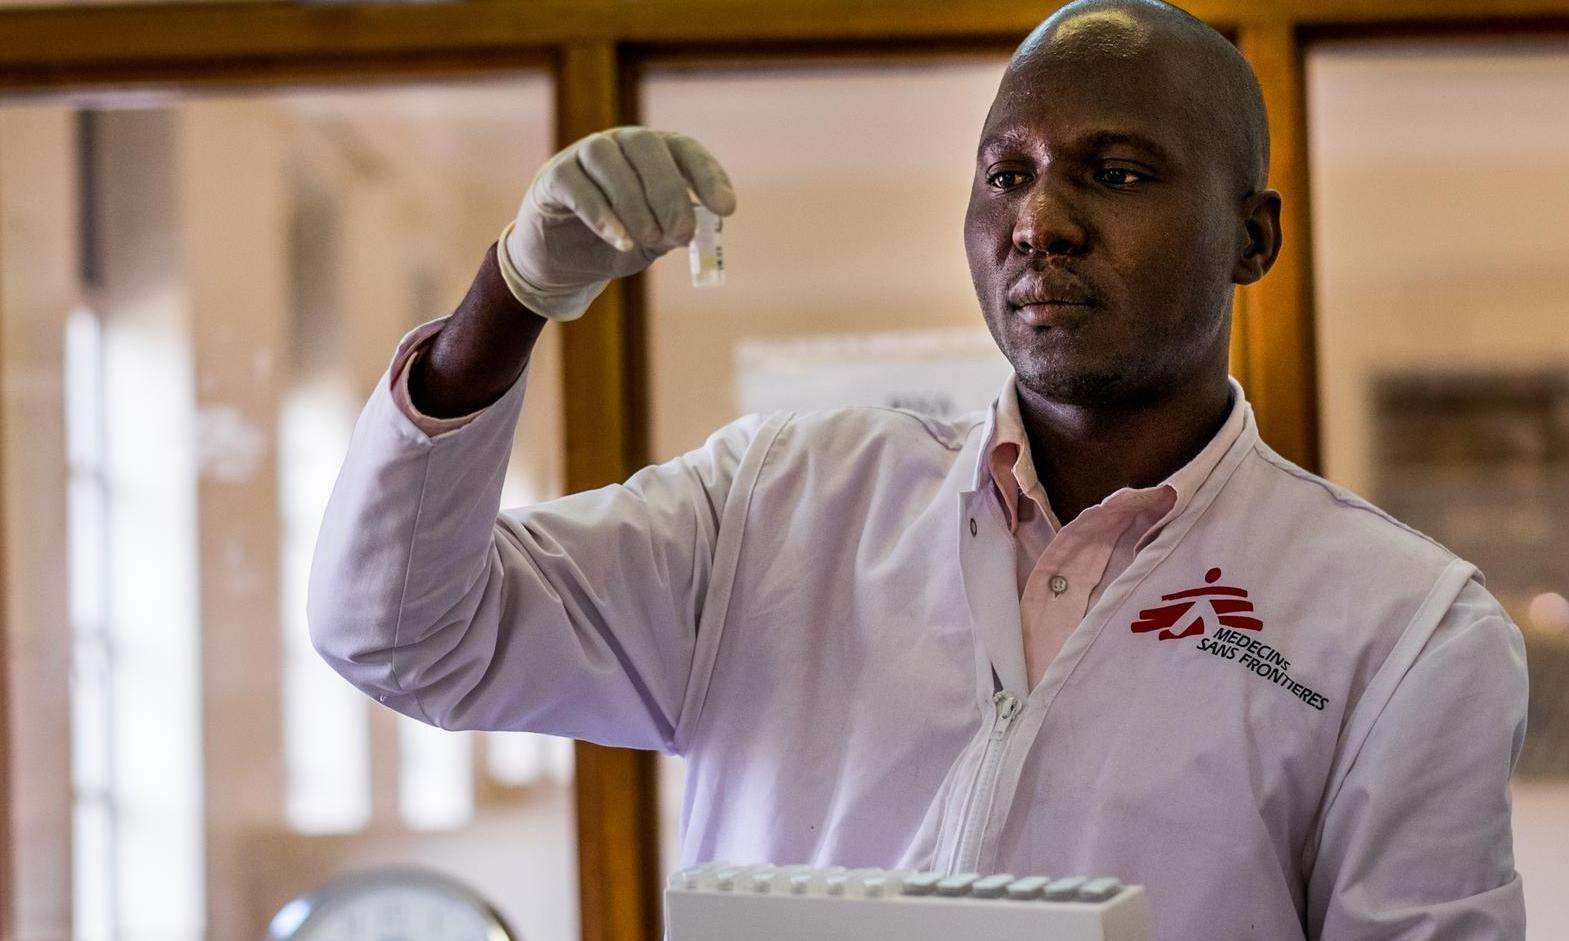 An MSF doctor holds up a test tube he is examining in a lab in Arua, Uganda.